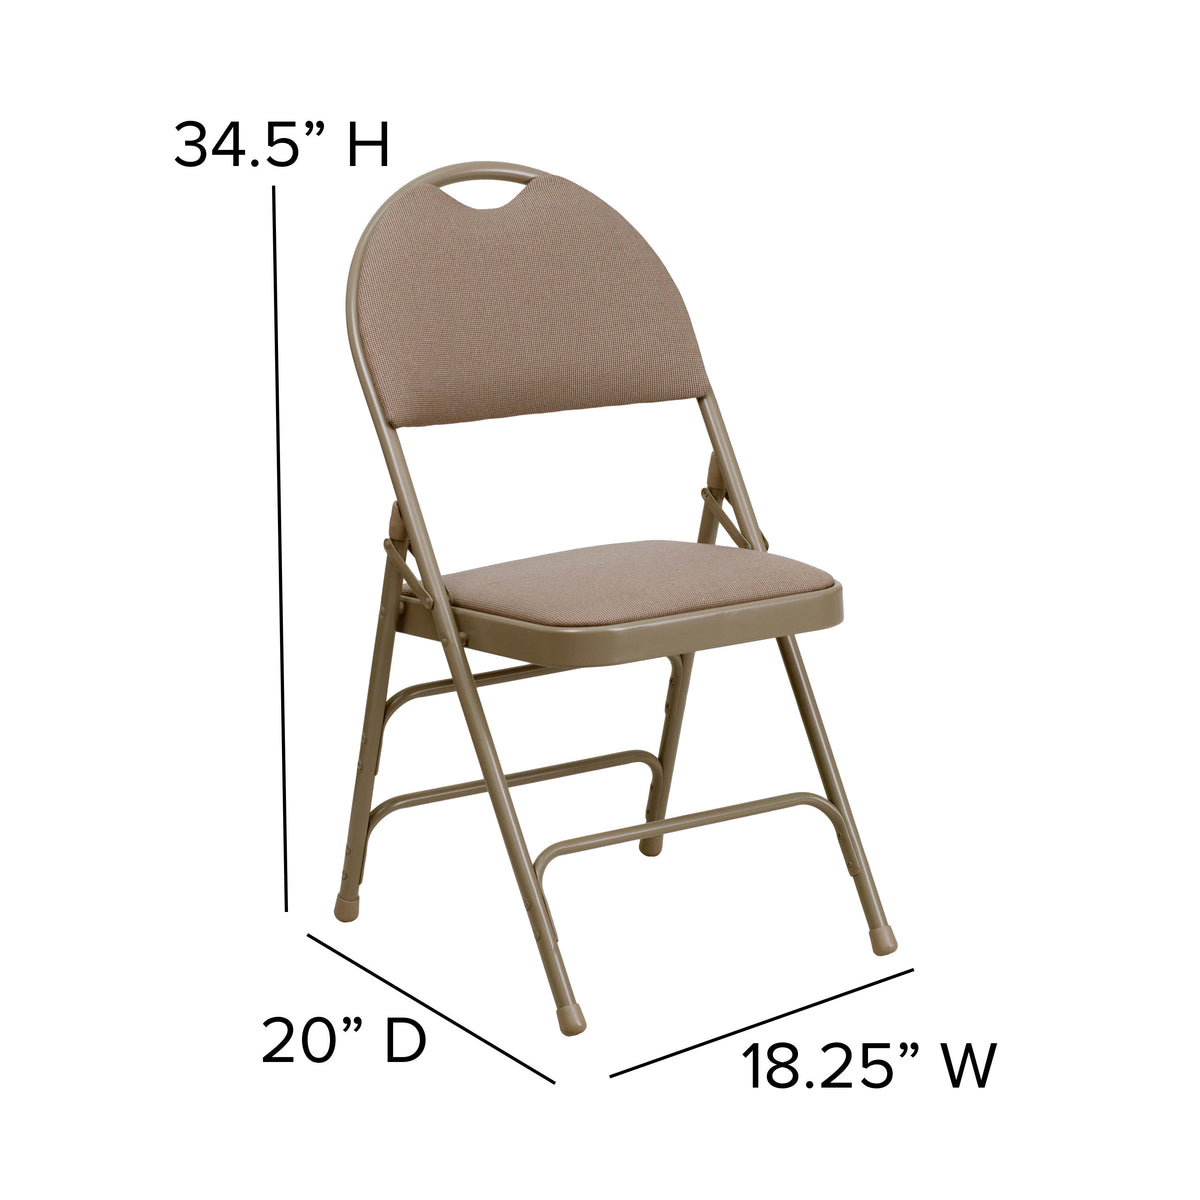 Beige Fabric/Beige Frame |#| Ultra-Premium Triple Braced Beige Fabric Folding Chair with Easy-Carry Handle